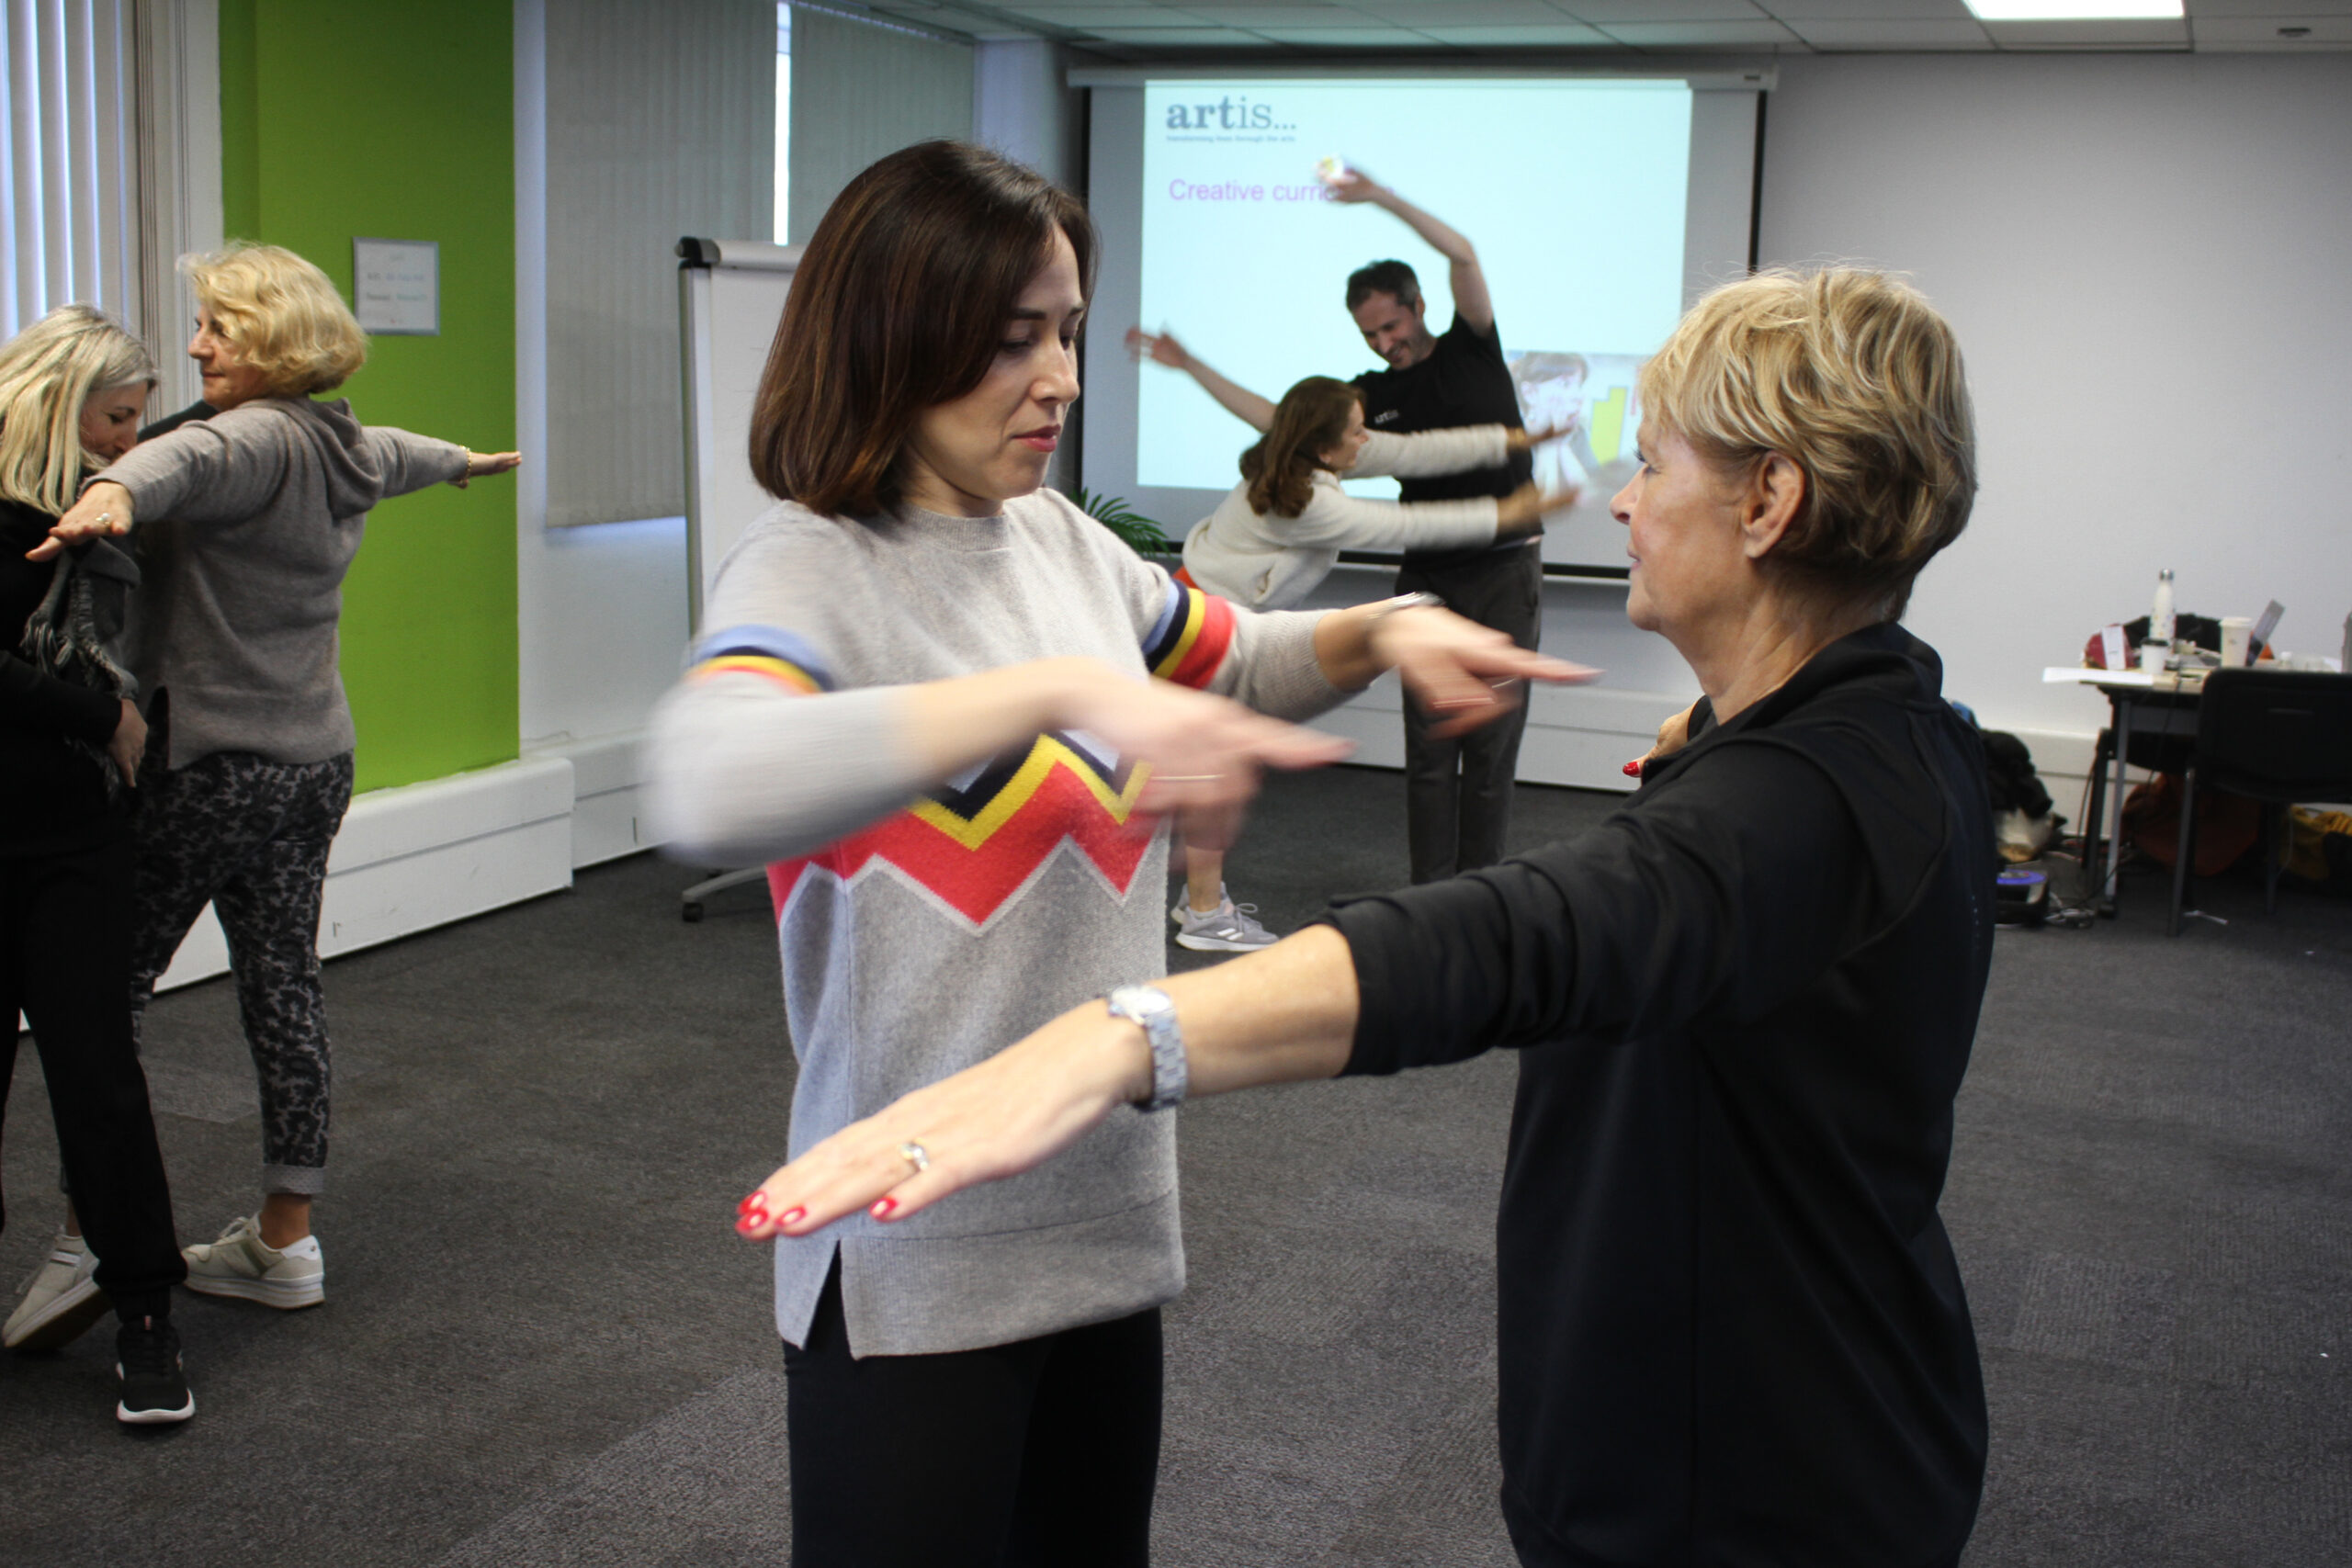 Two pairs of people engage in a guided physical activity inside a classroom, with arms extended and facing each other. A presentation screen and whiteboard are visible in the background.